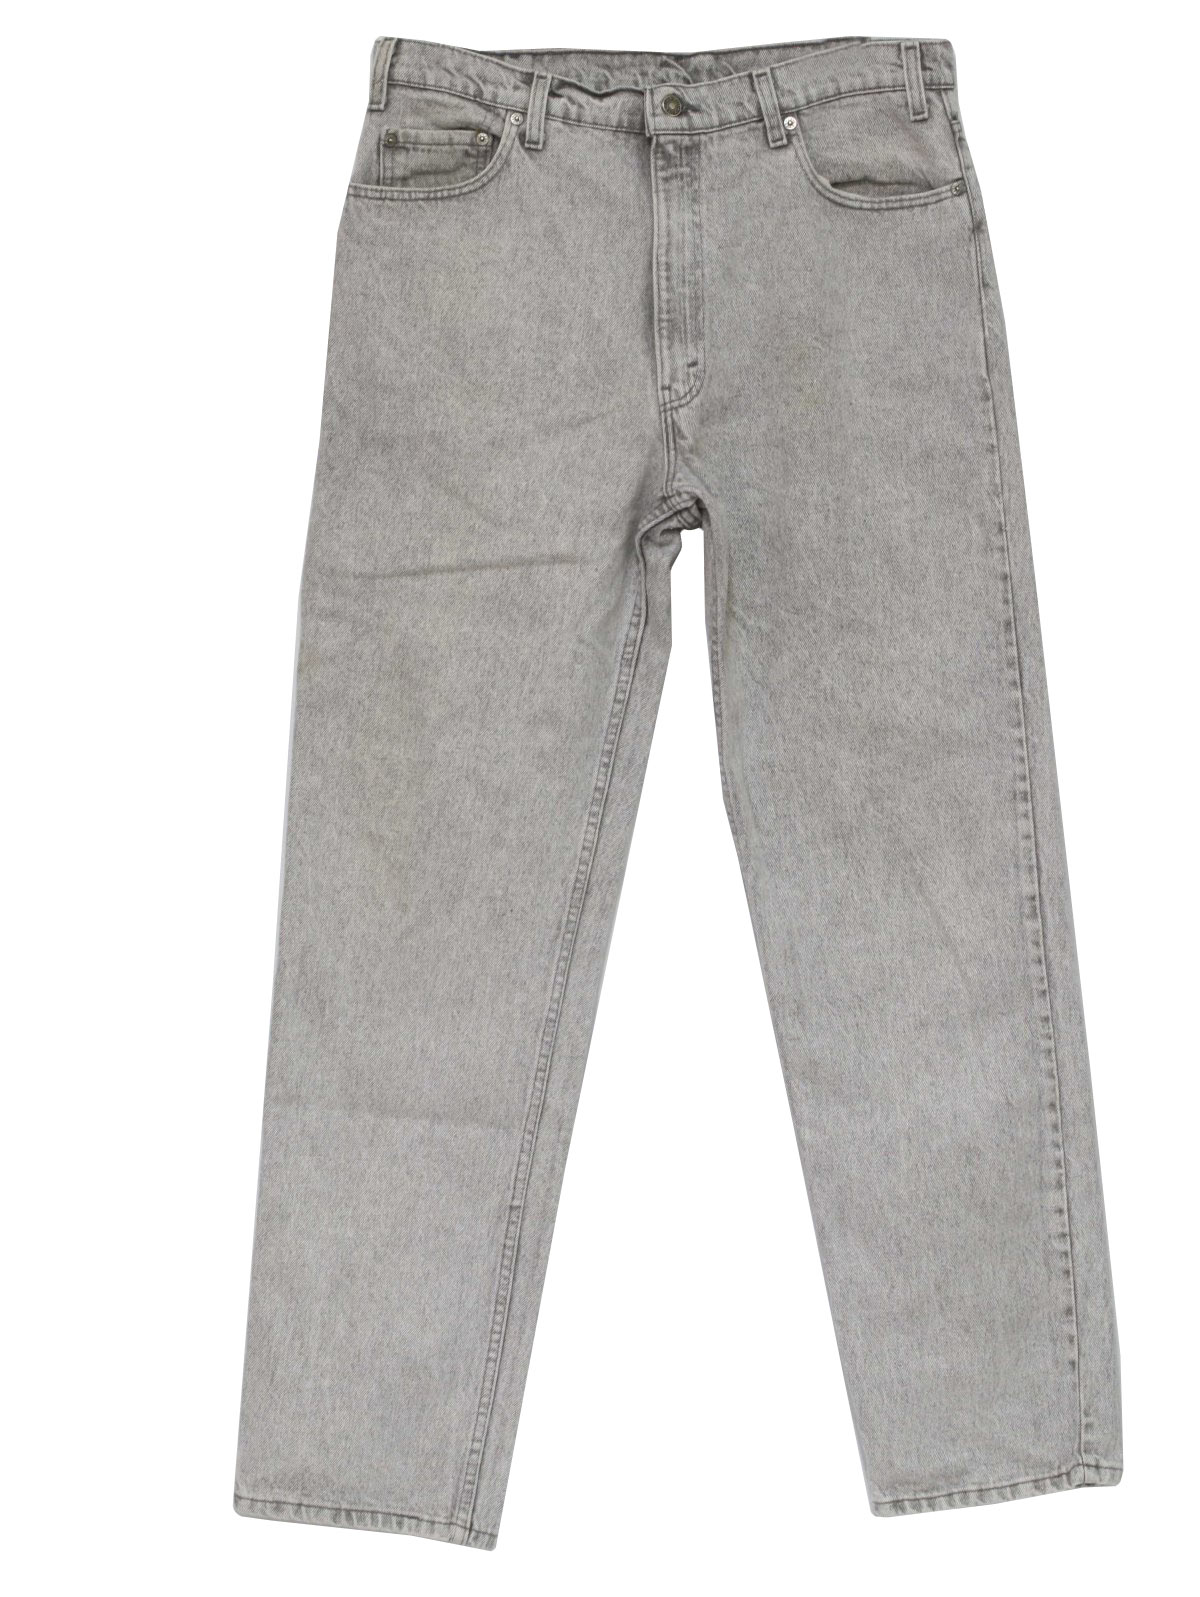 Vintage Levis Eighties Pants: 80s -Levis- Mens grey and white stone ...